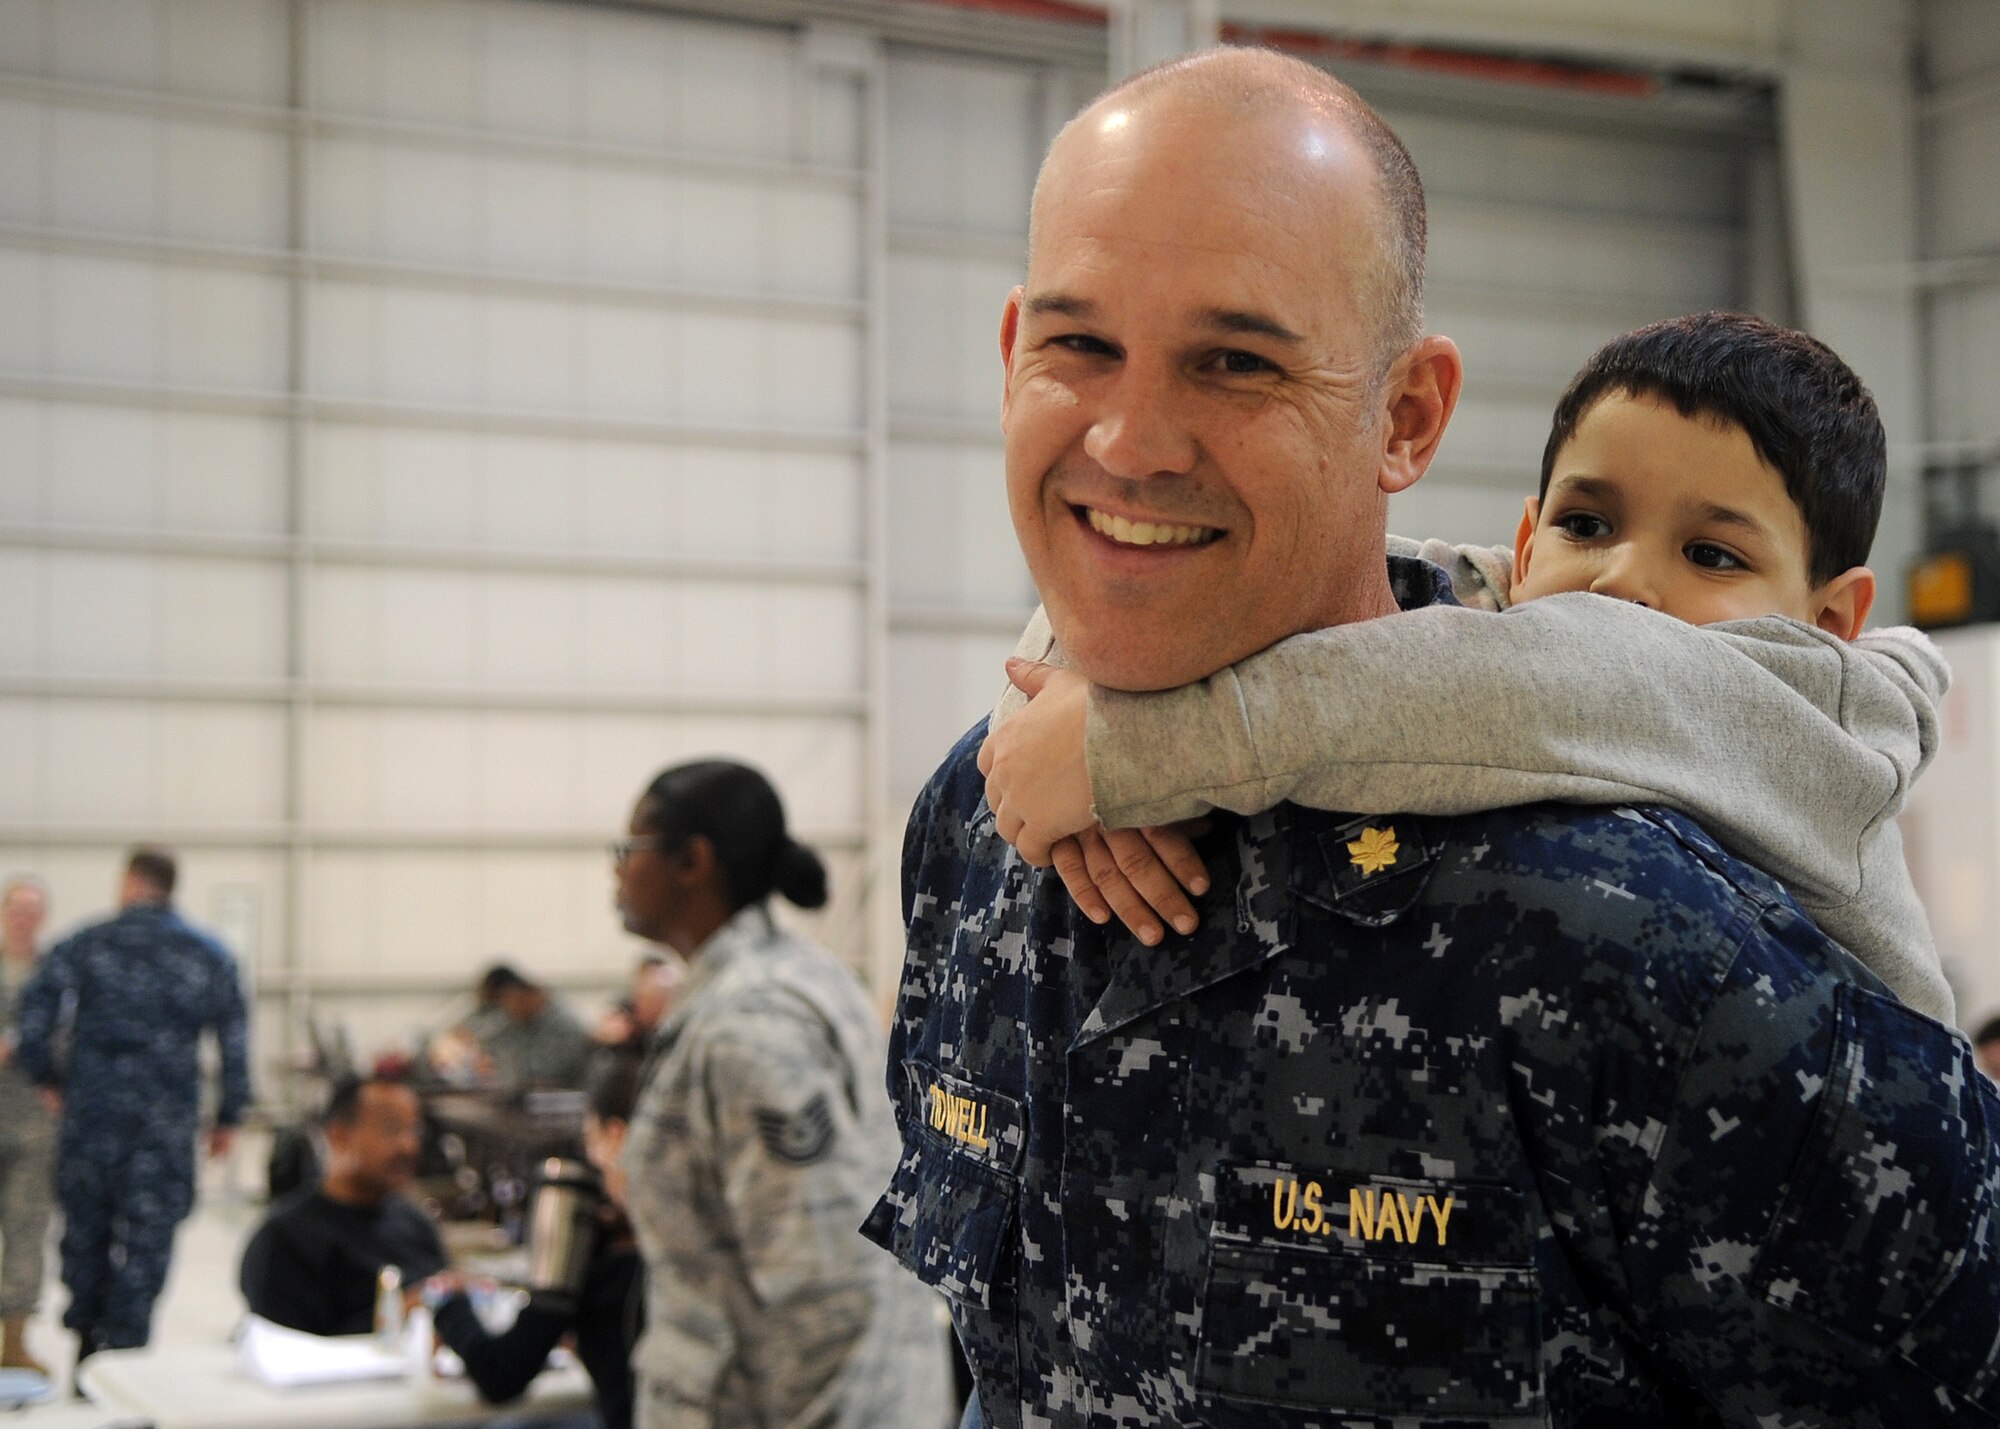 Buckley Air Force Base, Colo- Lt. Commander Chad Tidwell, United States Navy Reserve, gives Ethan Schinder a piggy back ride March 25, 2011. Denver International Airport has been receiving military dependent evacuees from Japan during Operation Pacific Passage. Lt. Commander Tidwell volunteered to welcome home the evacuees and to entertain some of the children awaiting their next destination. (U.S. Air Force photo by Airman 1st Class Marcy Glass)